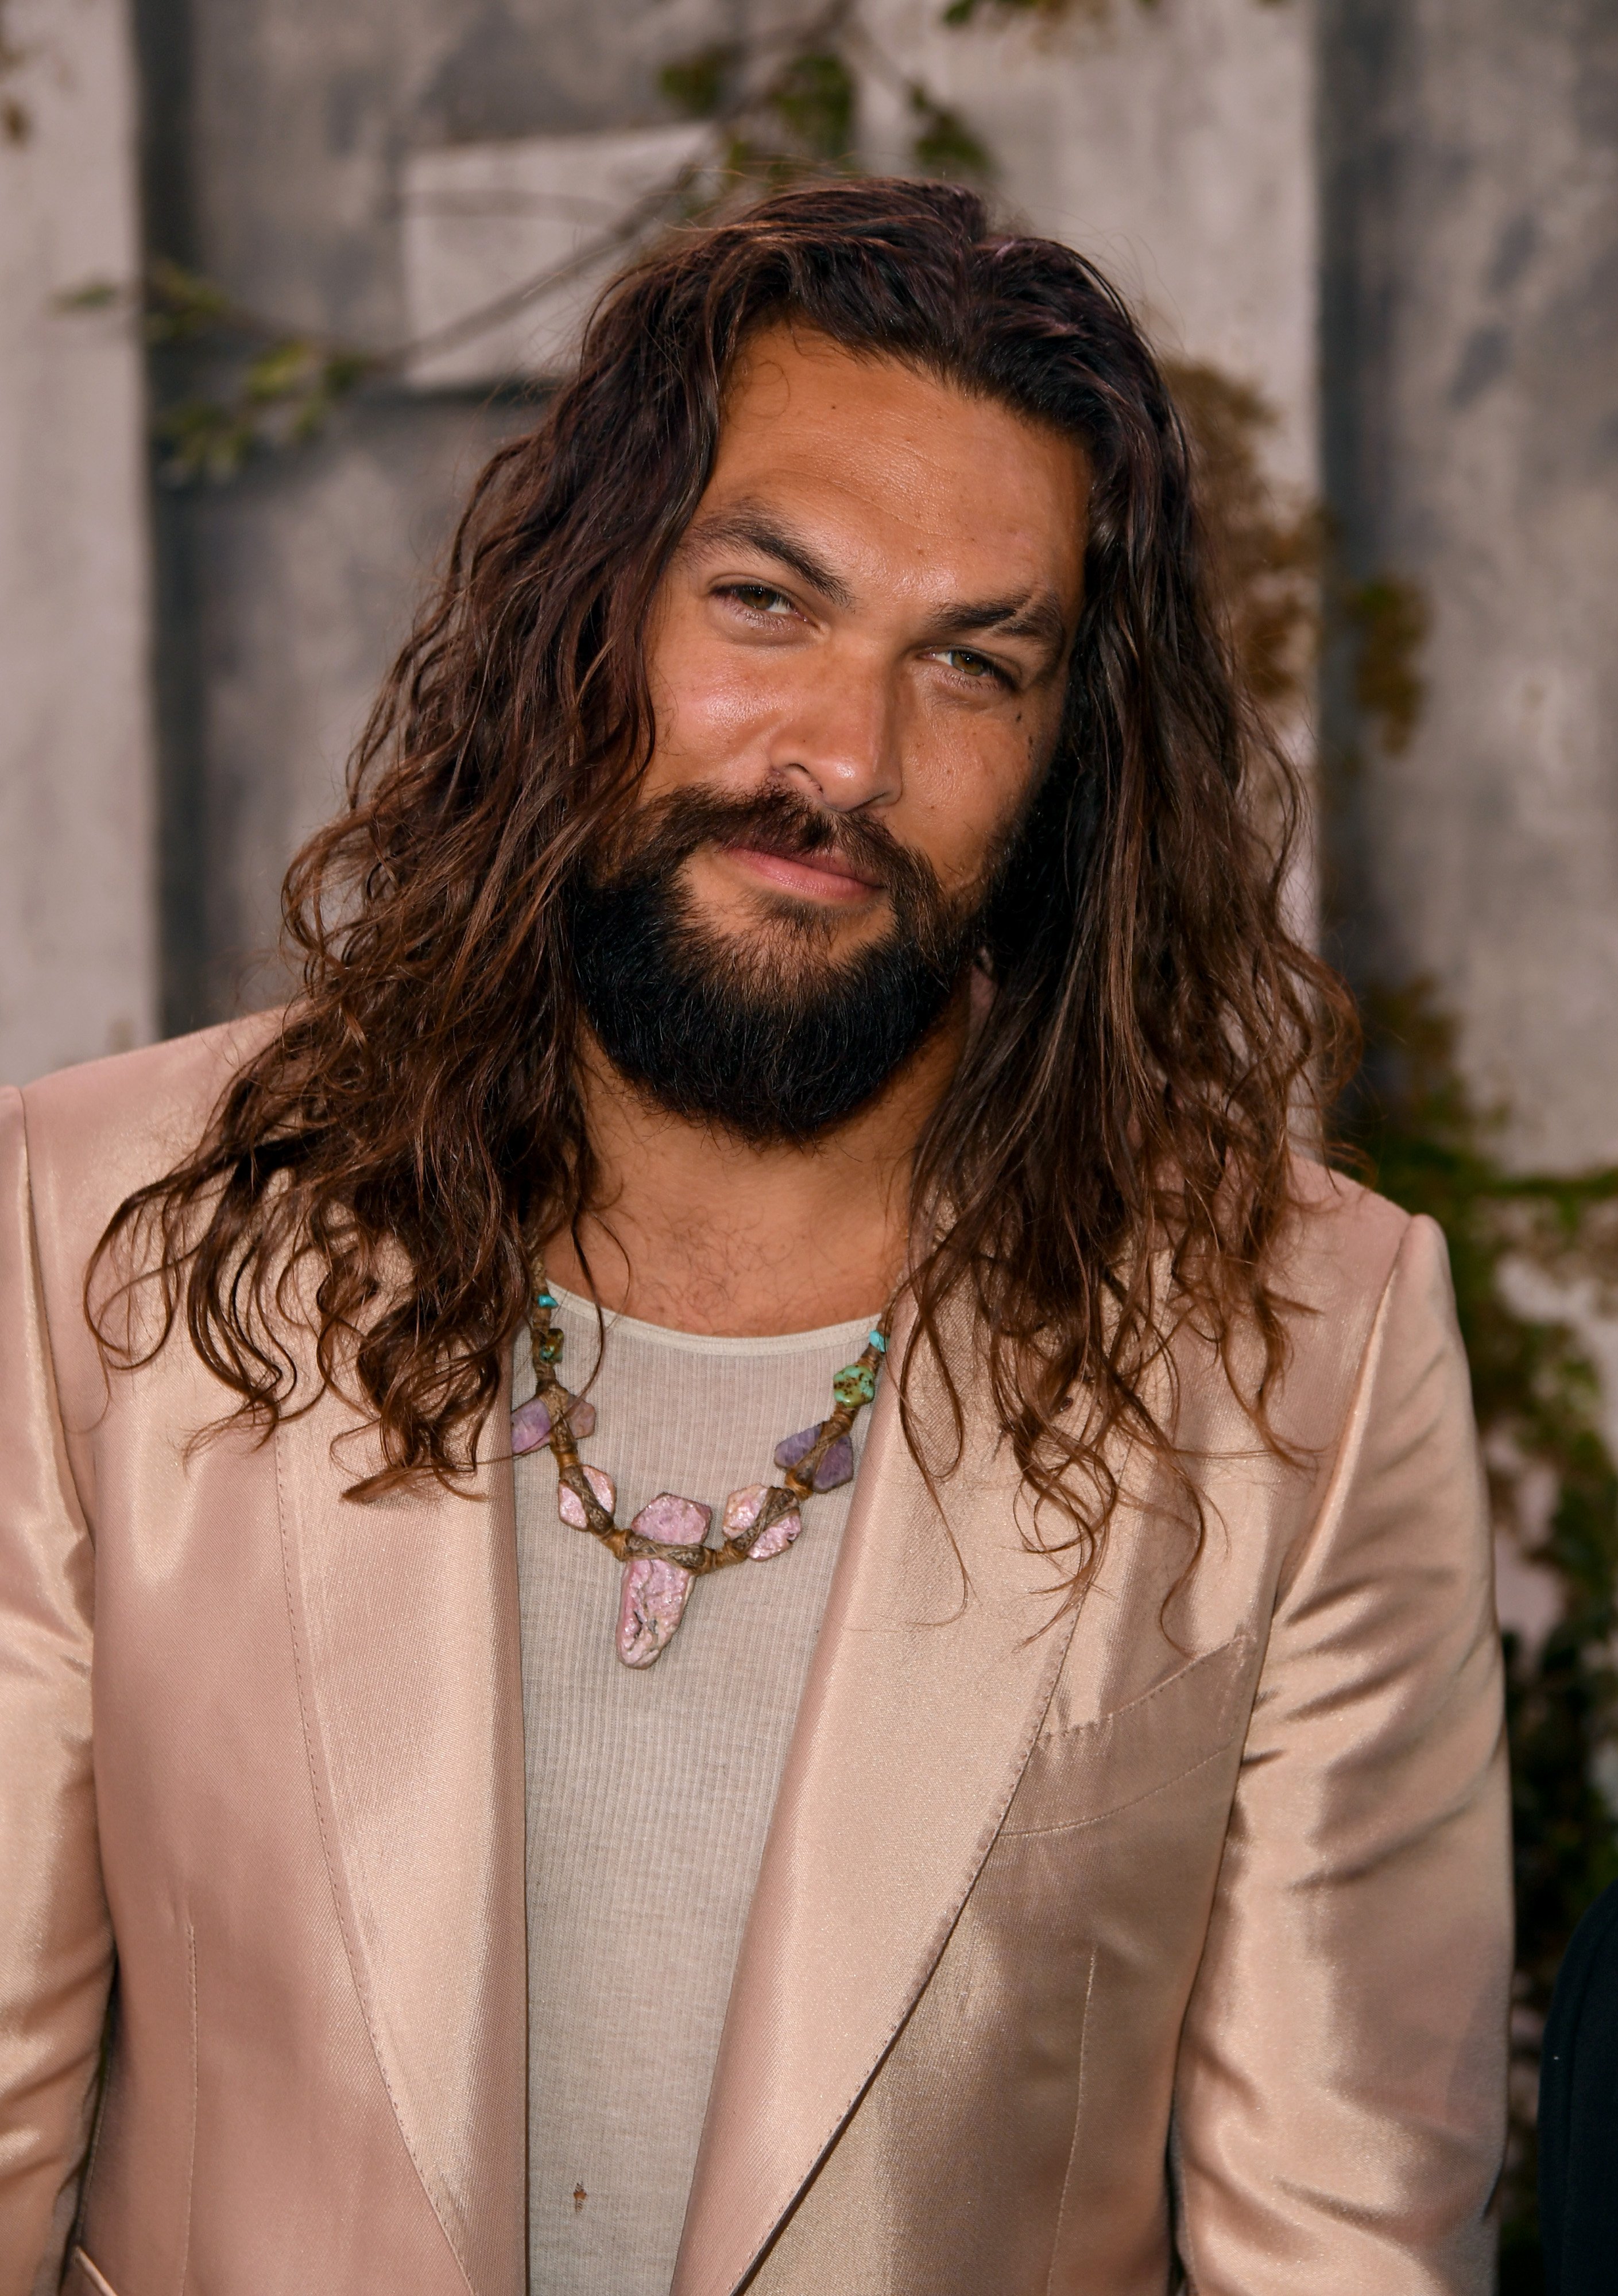 Jason Momoa attends the world premiere of Apple TV+'s "See" at Fox Village Theater on October 21, 2019 in Los Angeles, California | Source: Getty Images